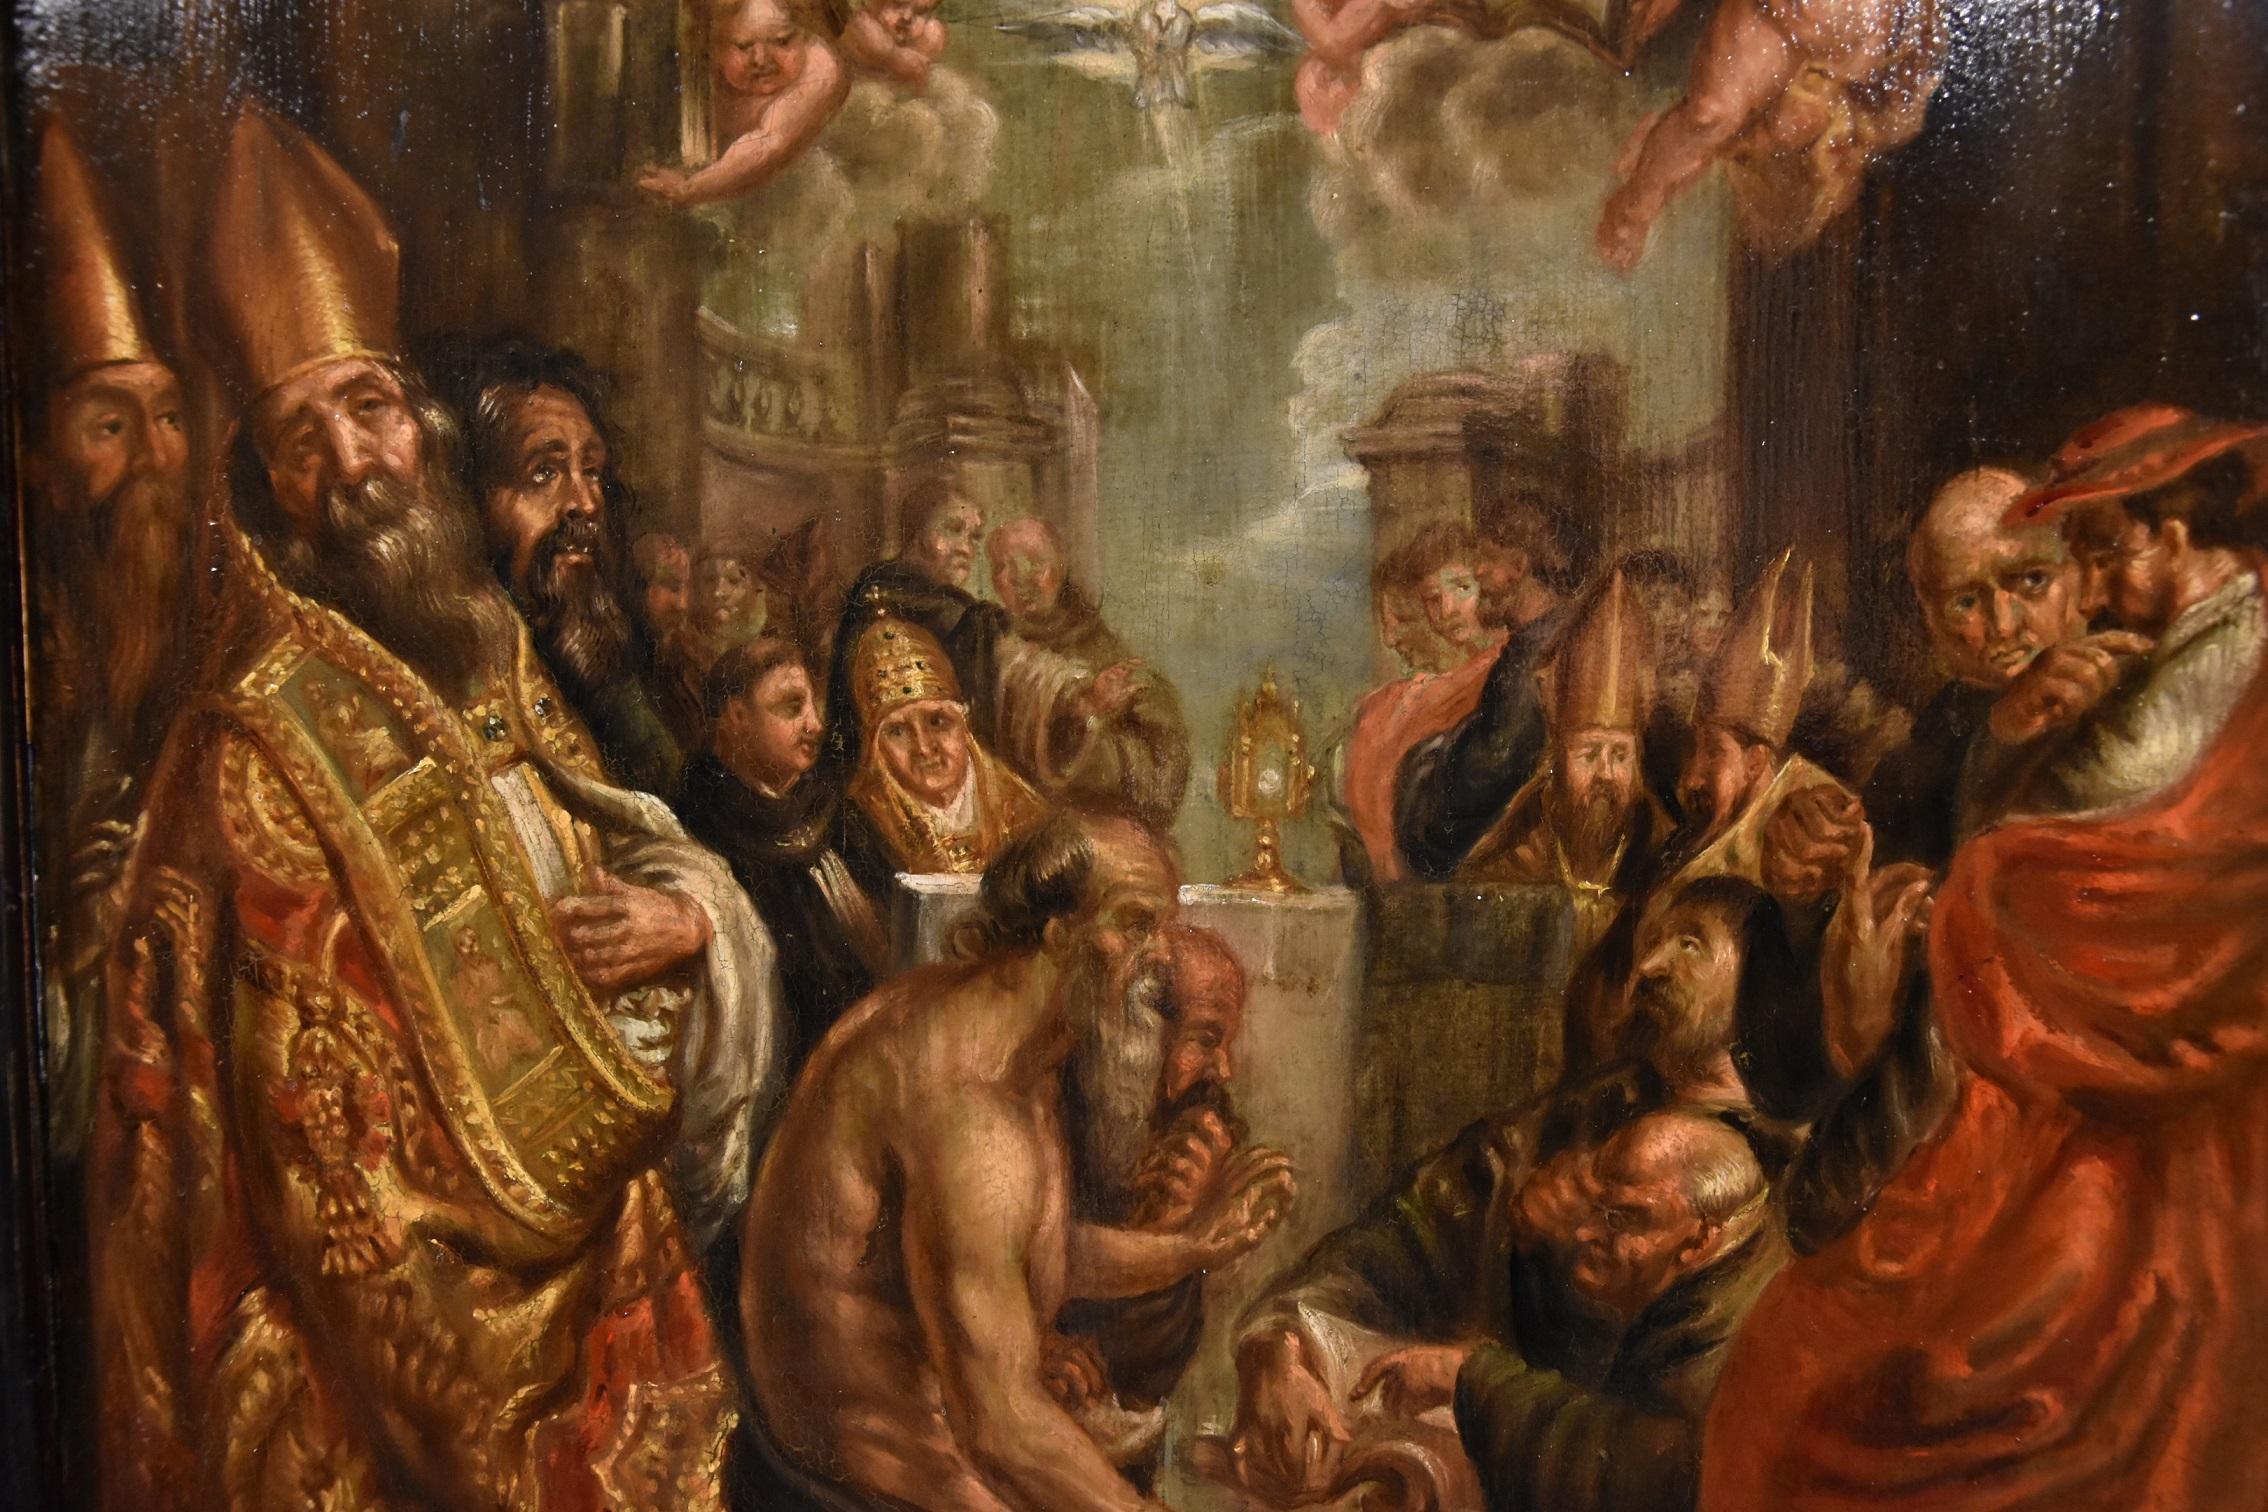 Flemish painter of the 17th century - Circle of Peter Paul Rubens (Siegen 1577 - Antwerp 1640)
Dispute on the Eucharist with the Four Fathers of the Latin Church

Oil on panel, 60 x 42 cm. - with frame 84 x 66 cm.

The painting, depicting the